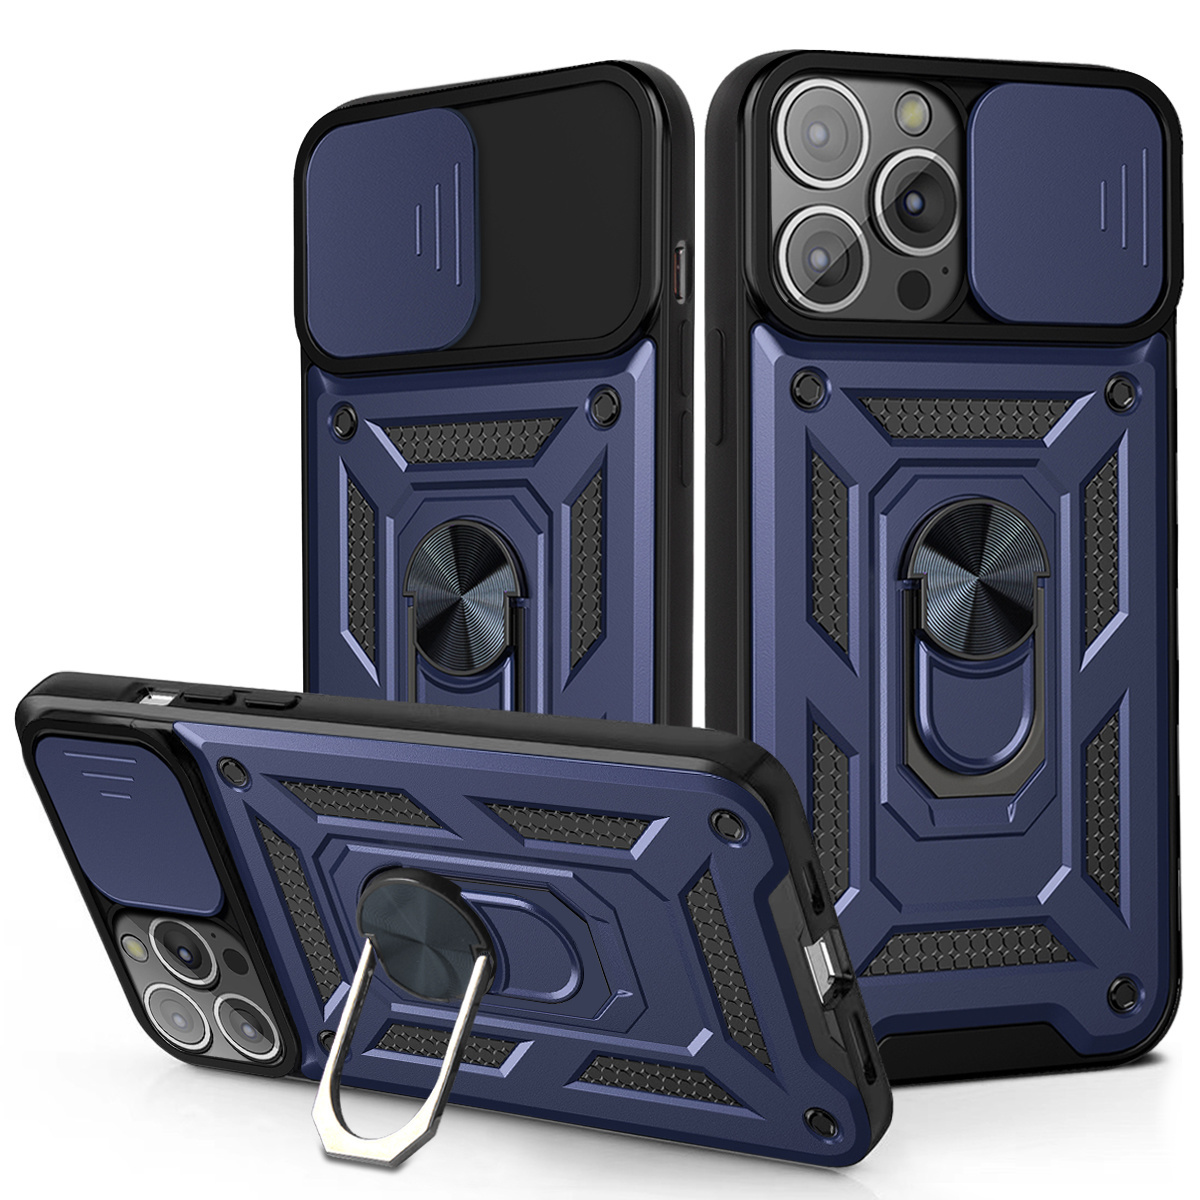 iPhone 14 Pro Max Rugged Armor Back Cover Hoesje met Camera Bescherming - Stevig - Heavy Duty - TPU - Apple iPhone 14 Pro Max - Blauw